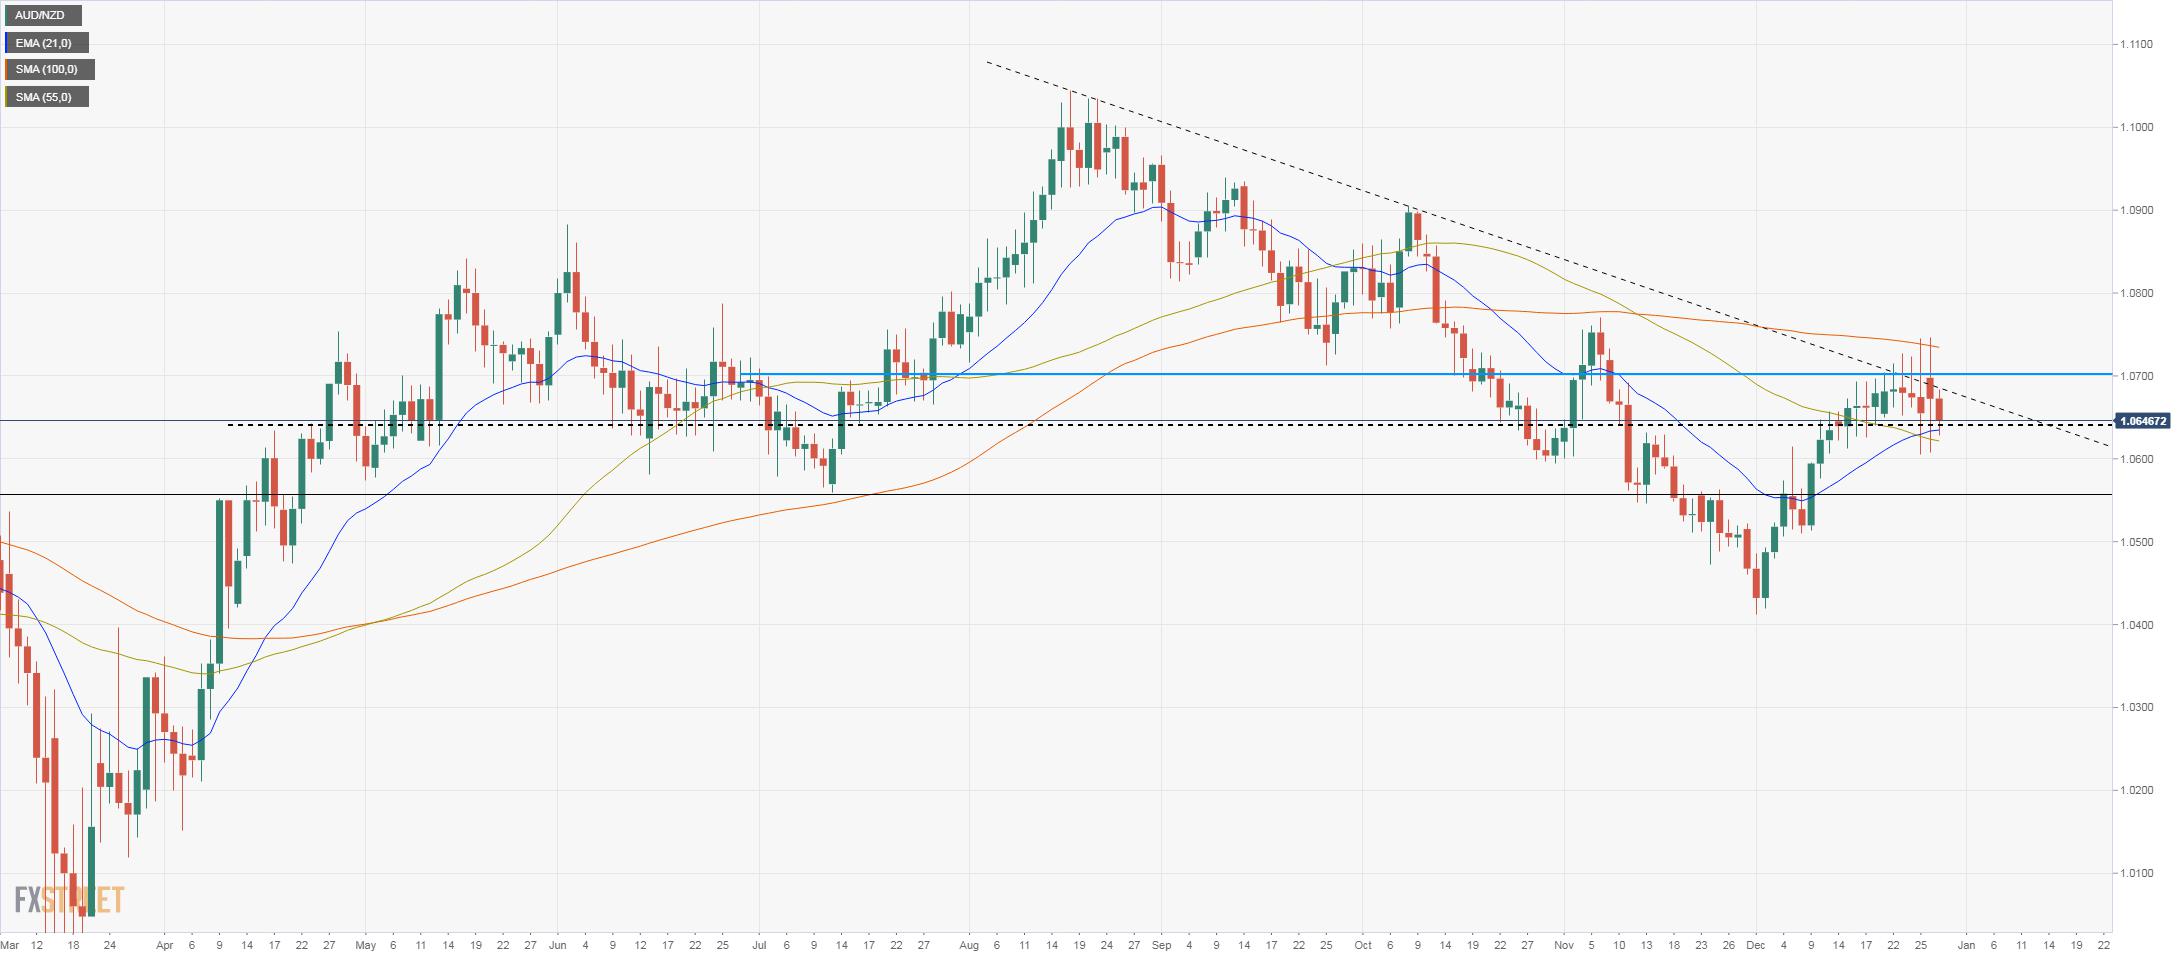 AUD/NZD Price Analysis: Correcting lower after being unable to break 1.0700